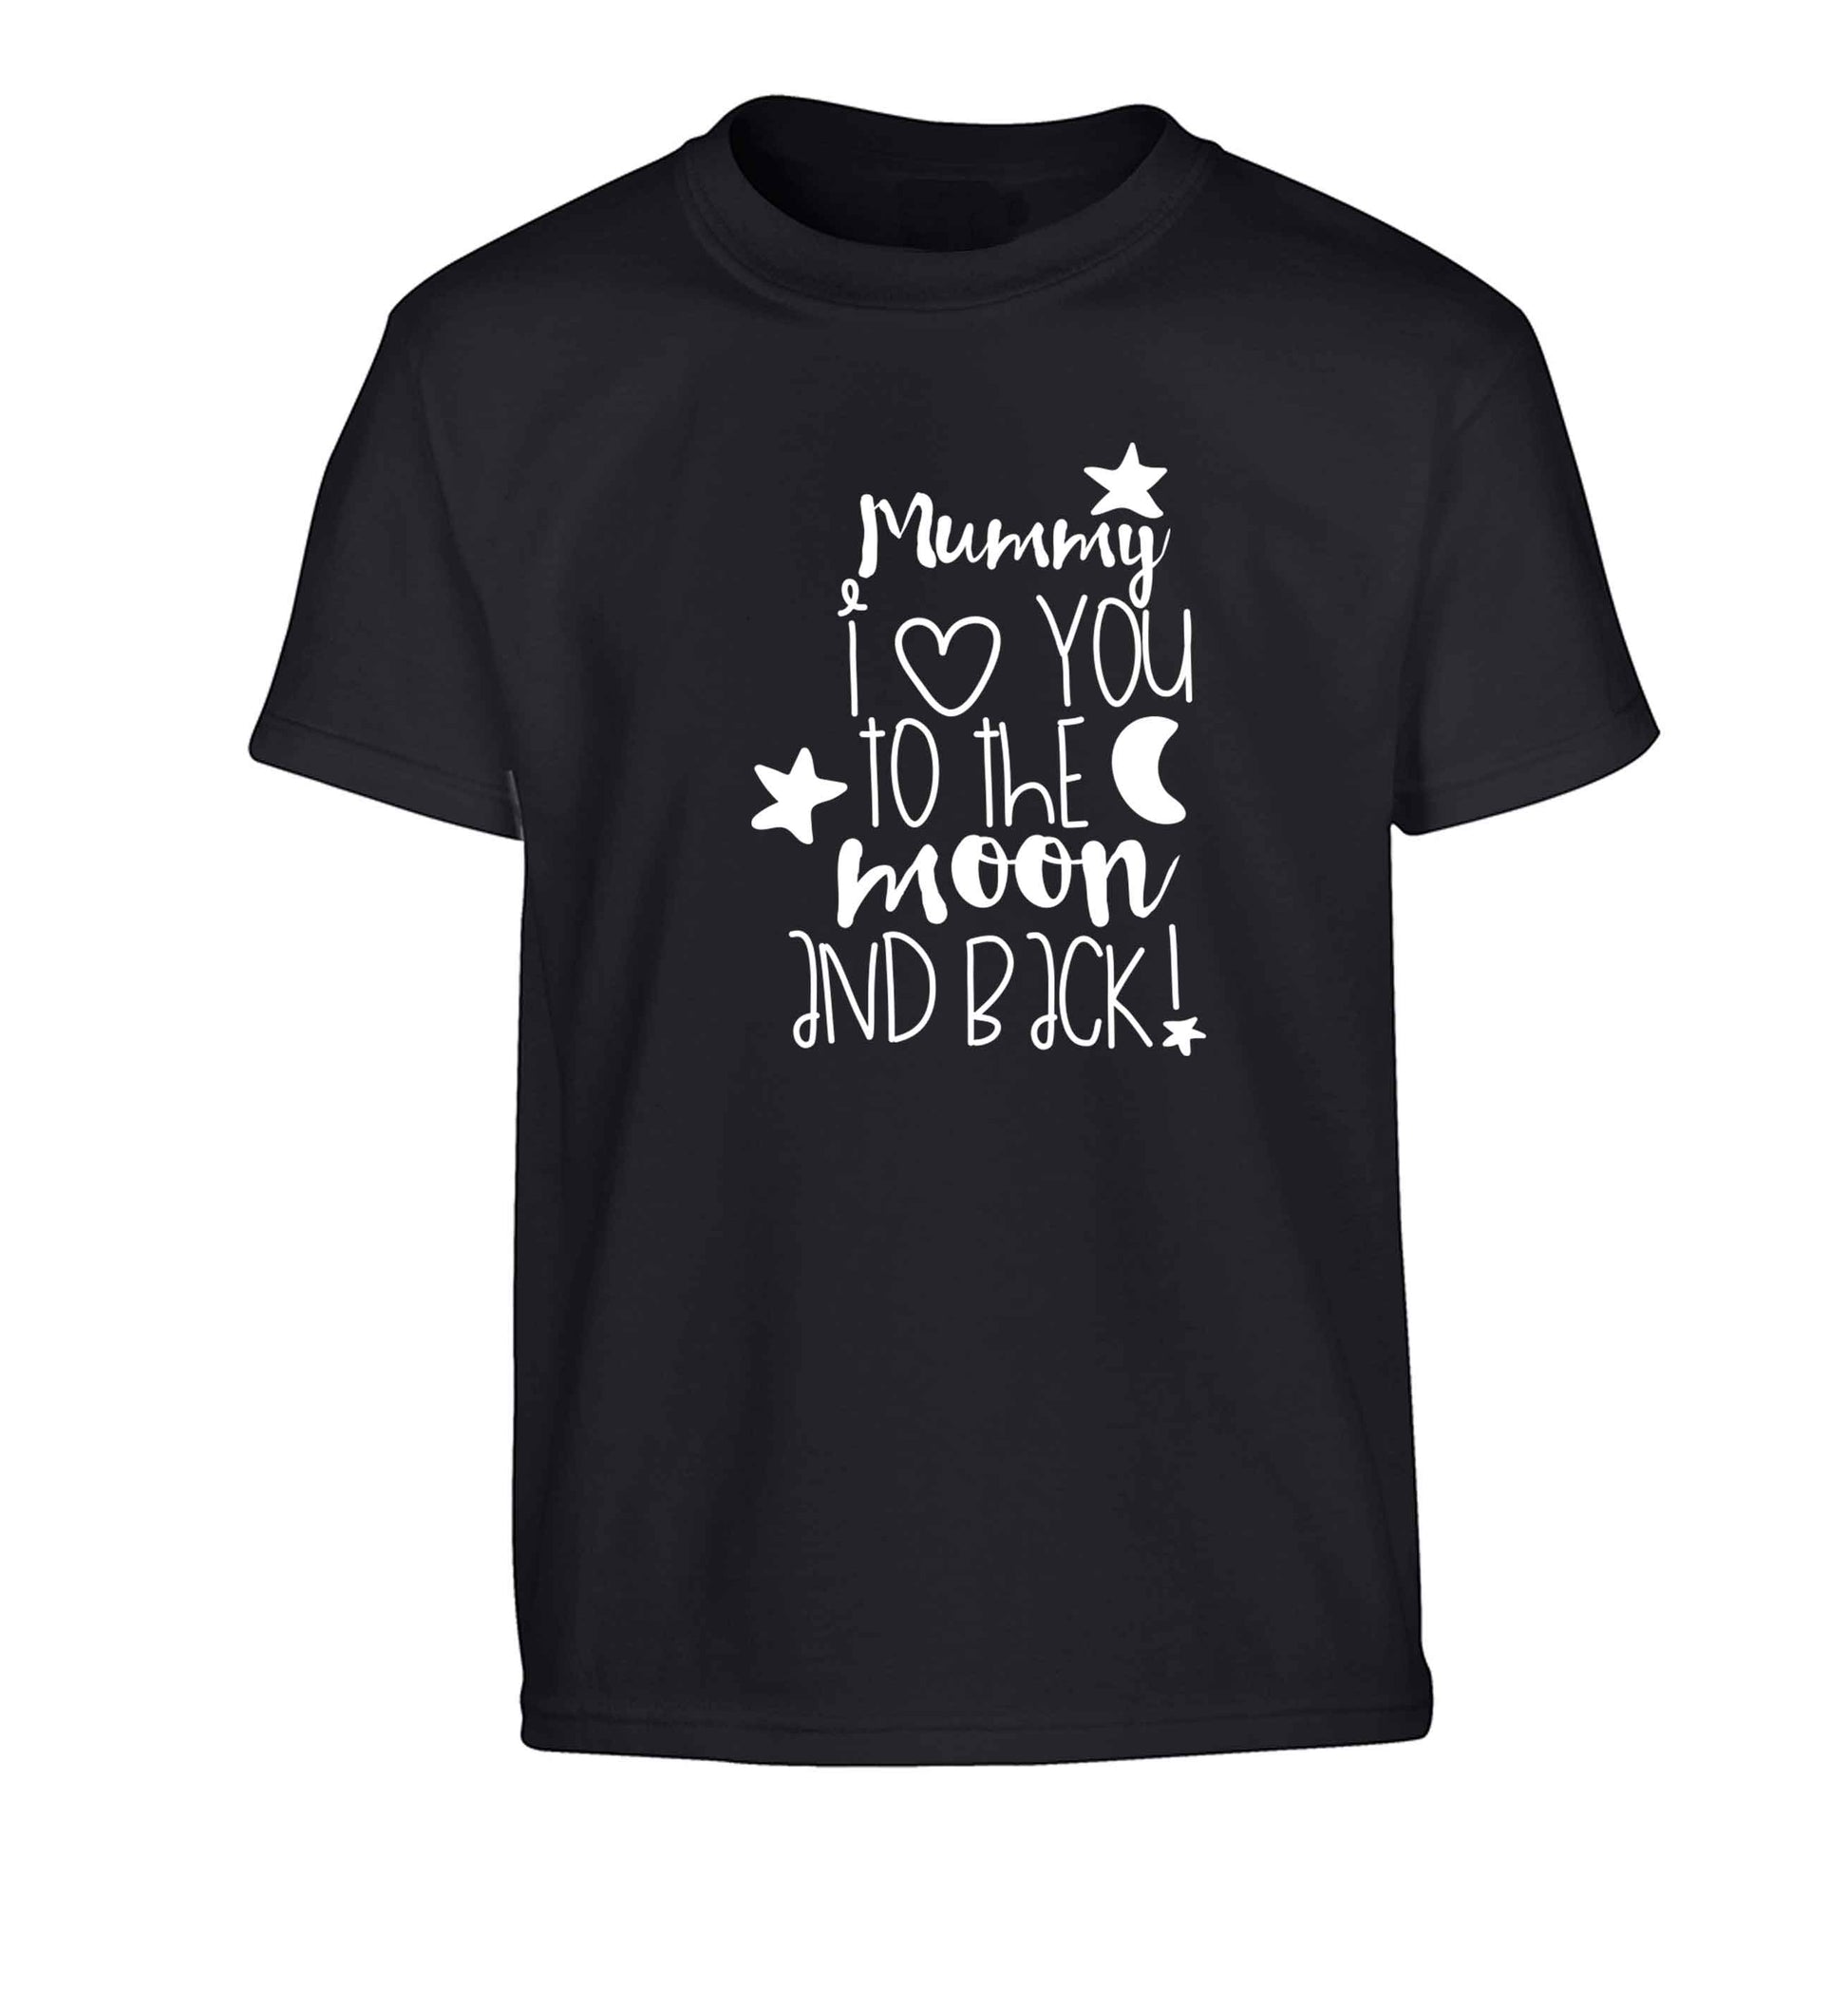 Mummy I love you to the moon and back Children's black Tshirt 12-13 Years